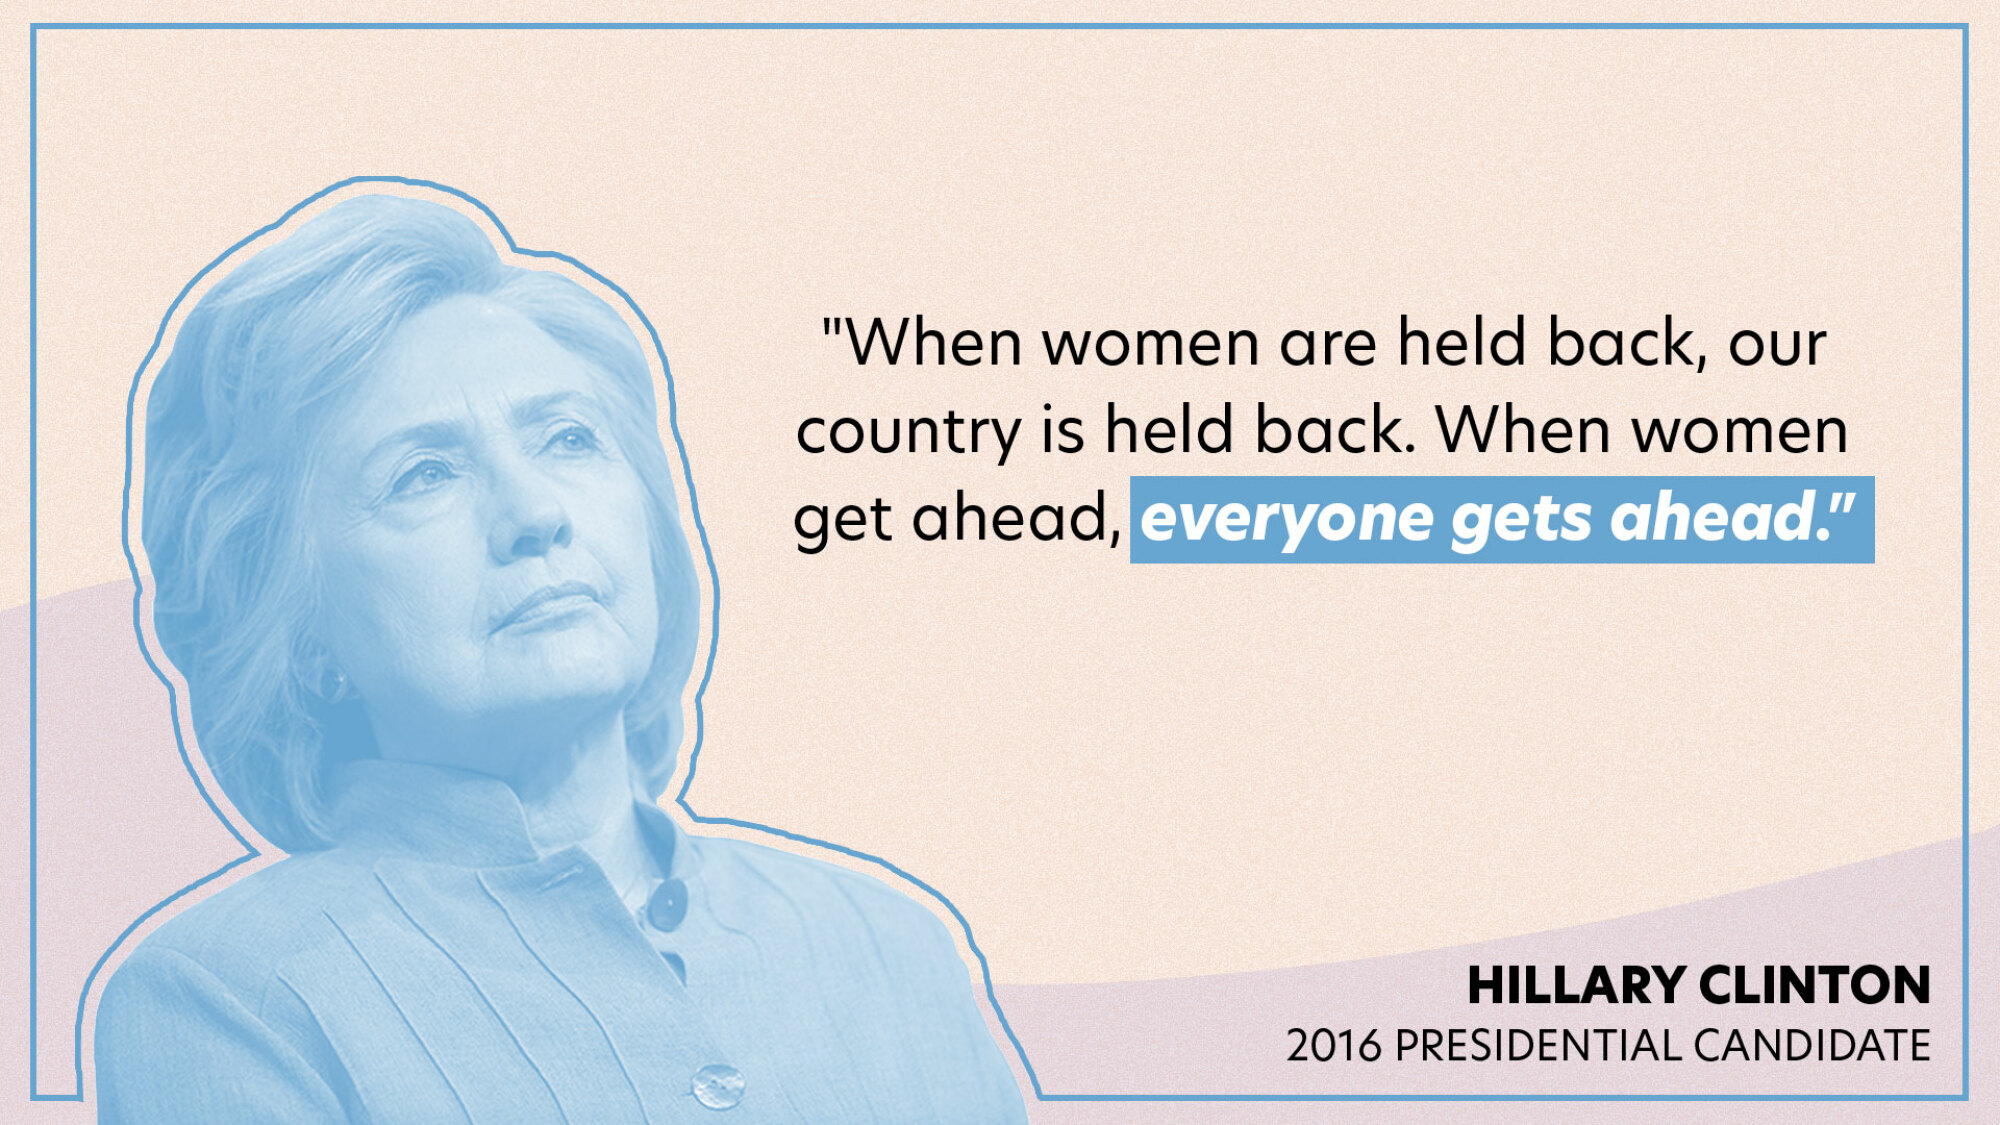 "When women are held back, our country is held back. When women get ahead, everyone gets ahead."